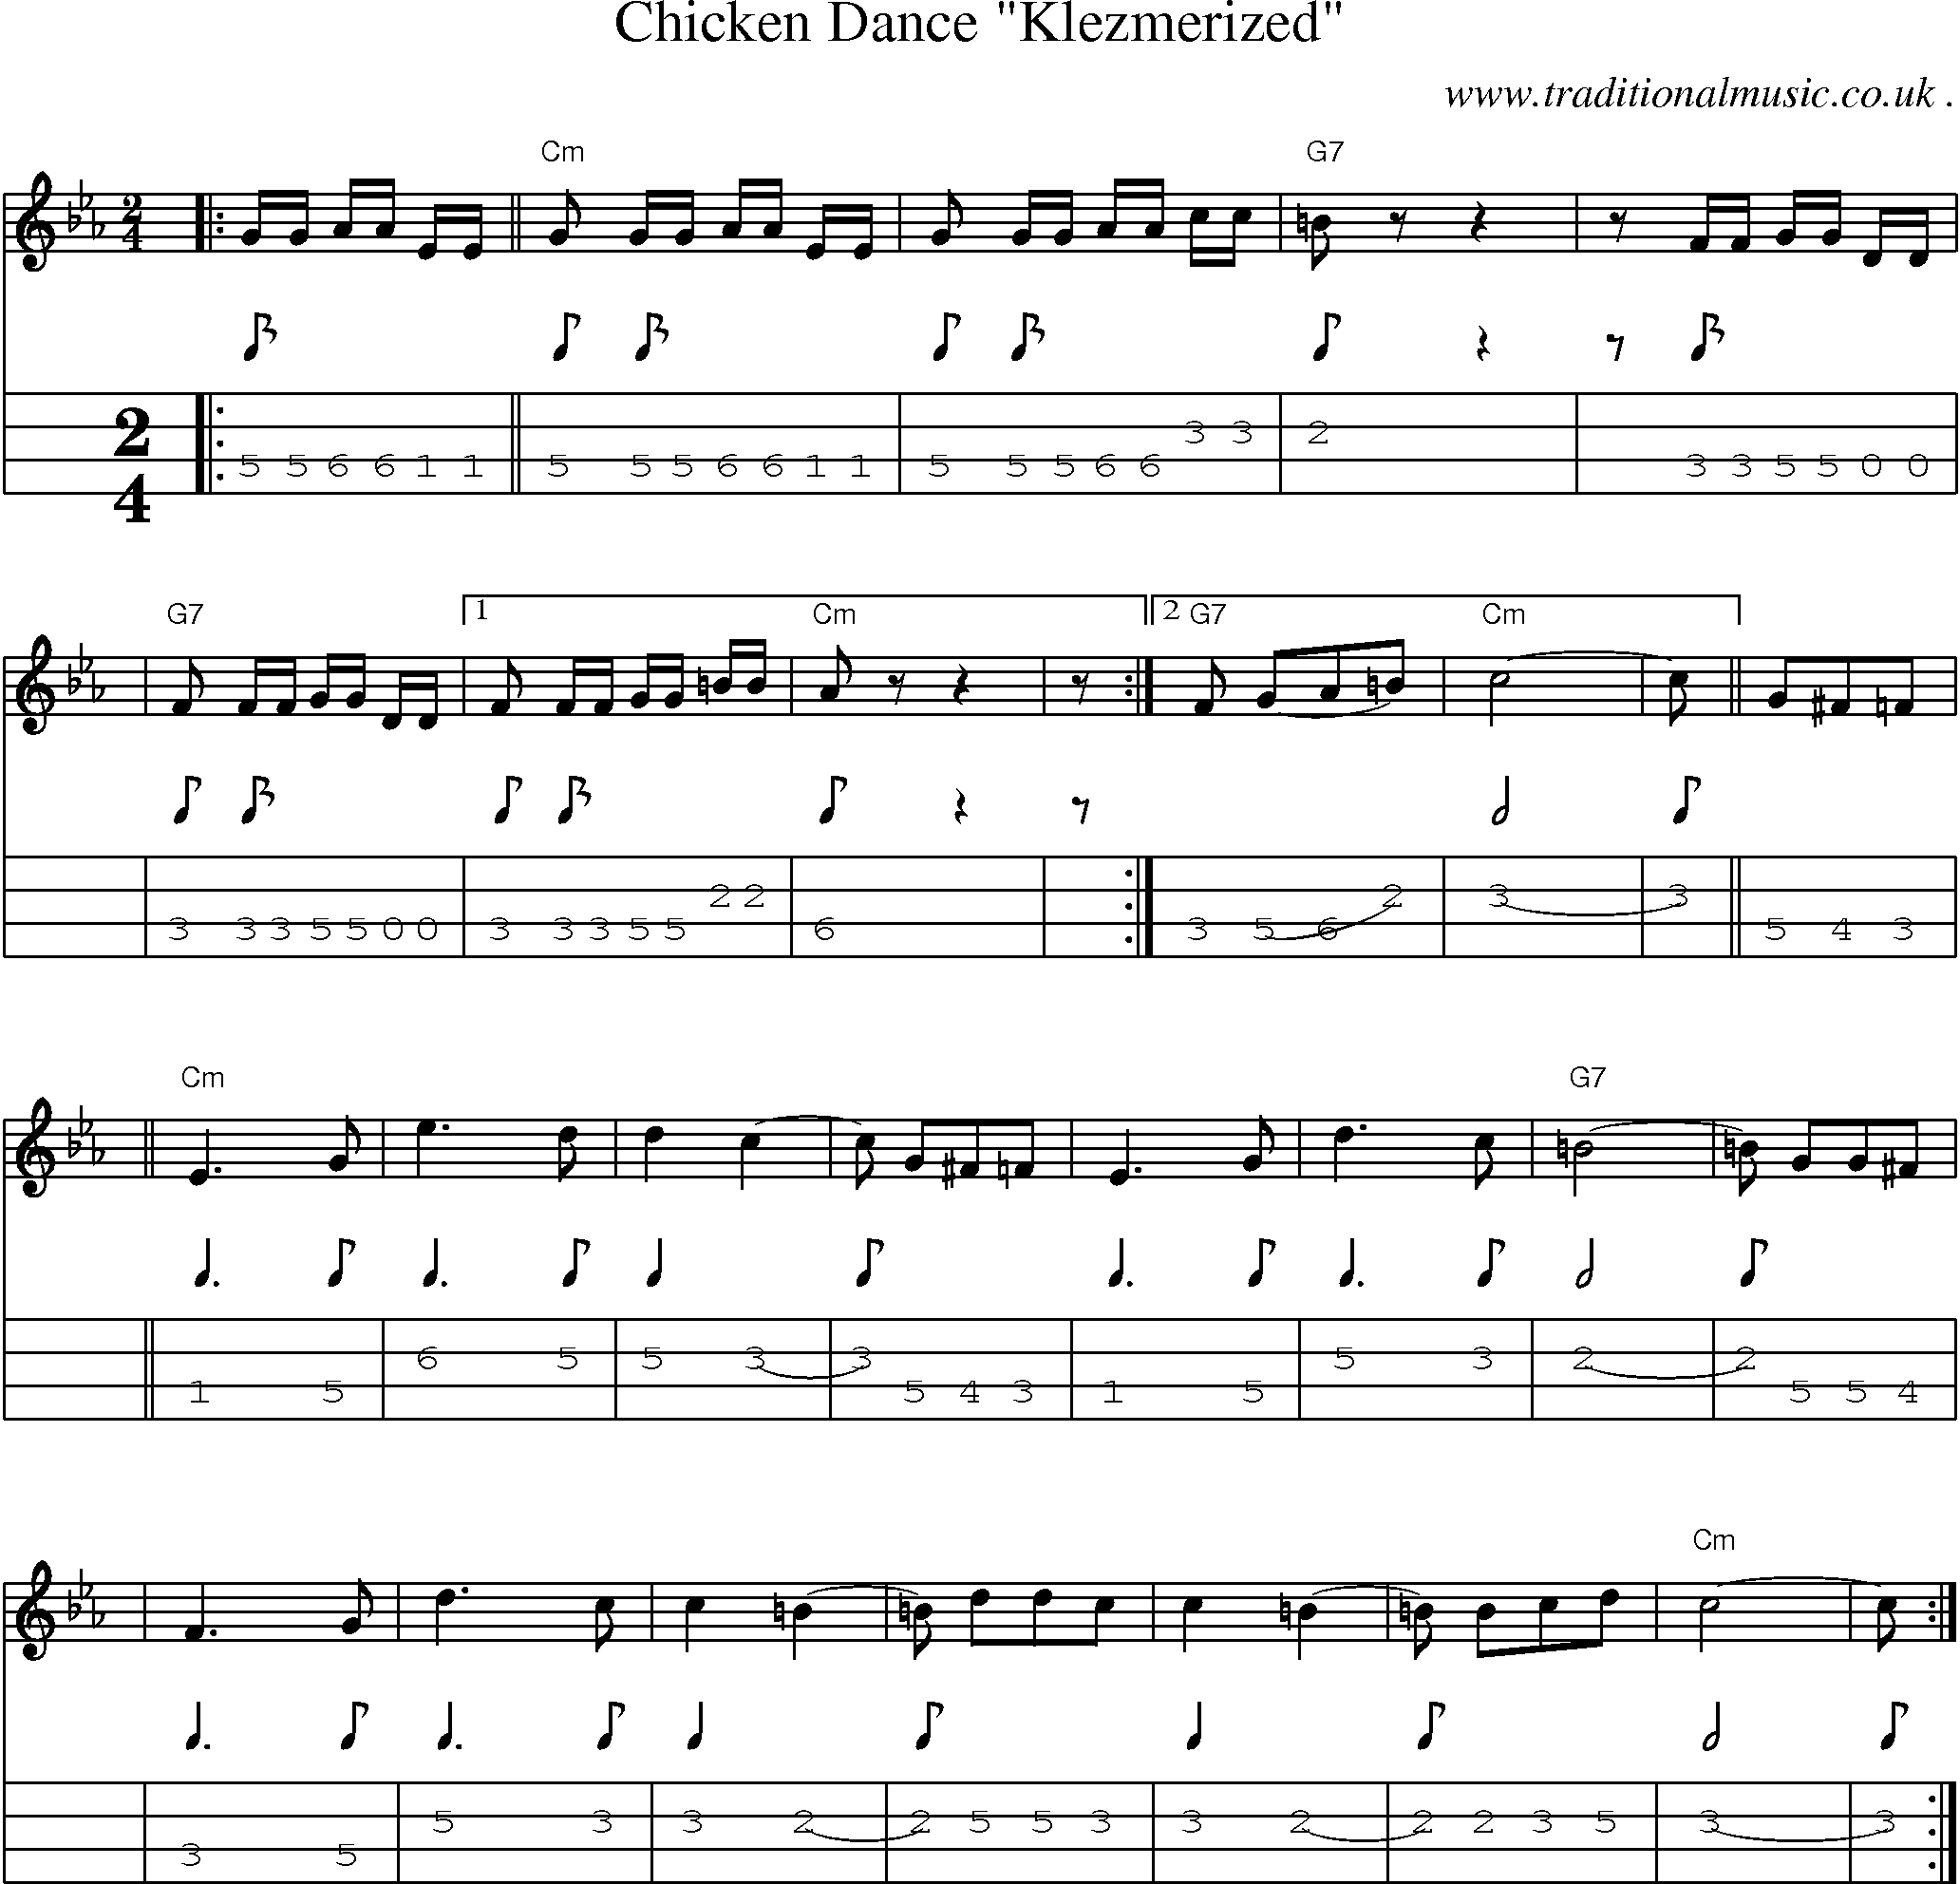 Music Score and Guitar Tabs for Chicken Dance Klezmerized